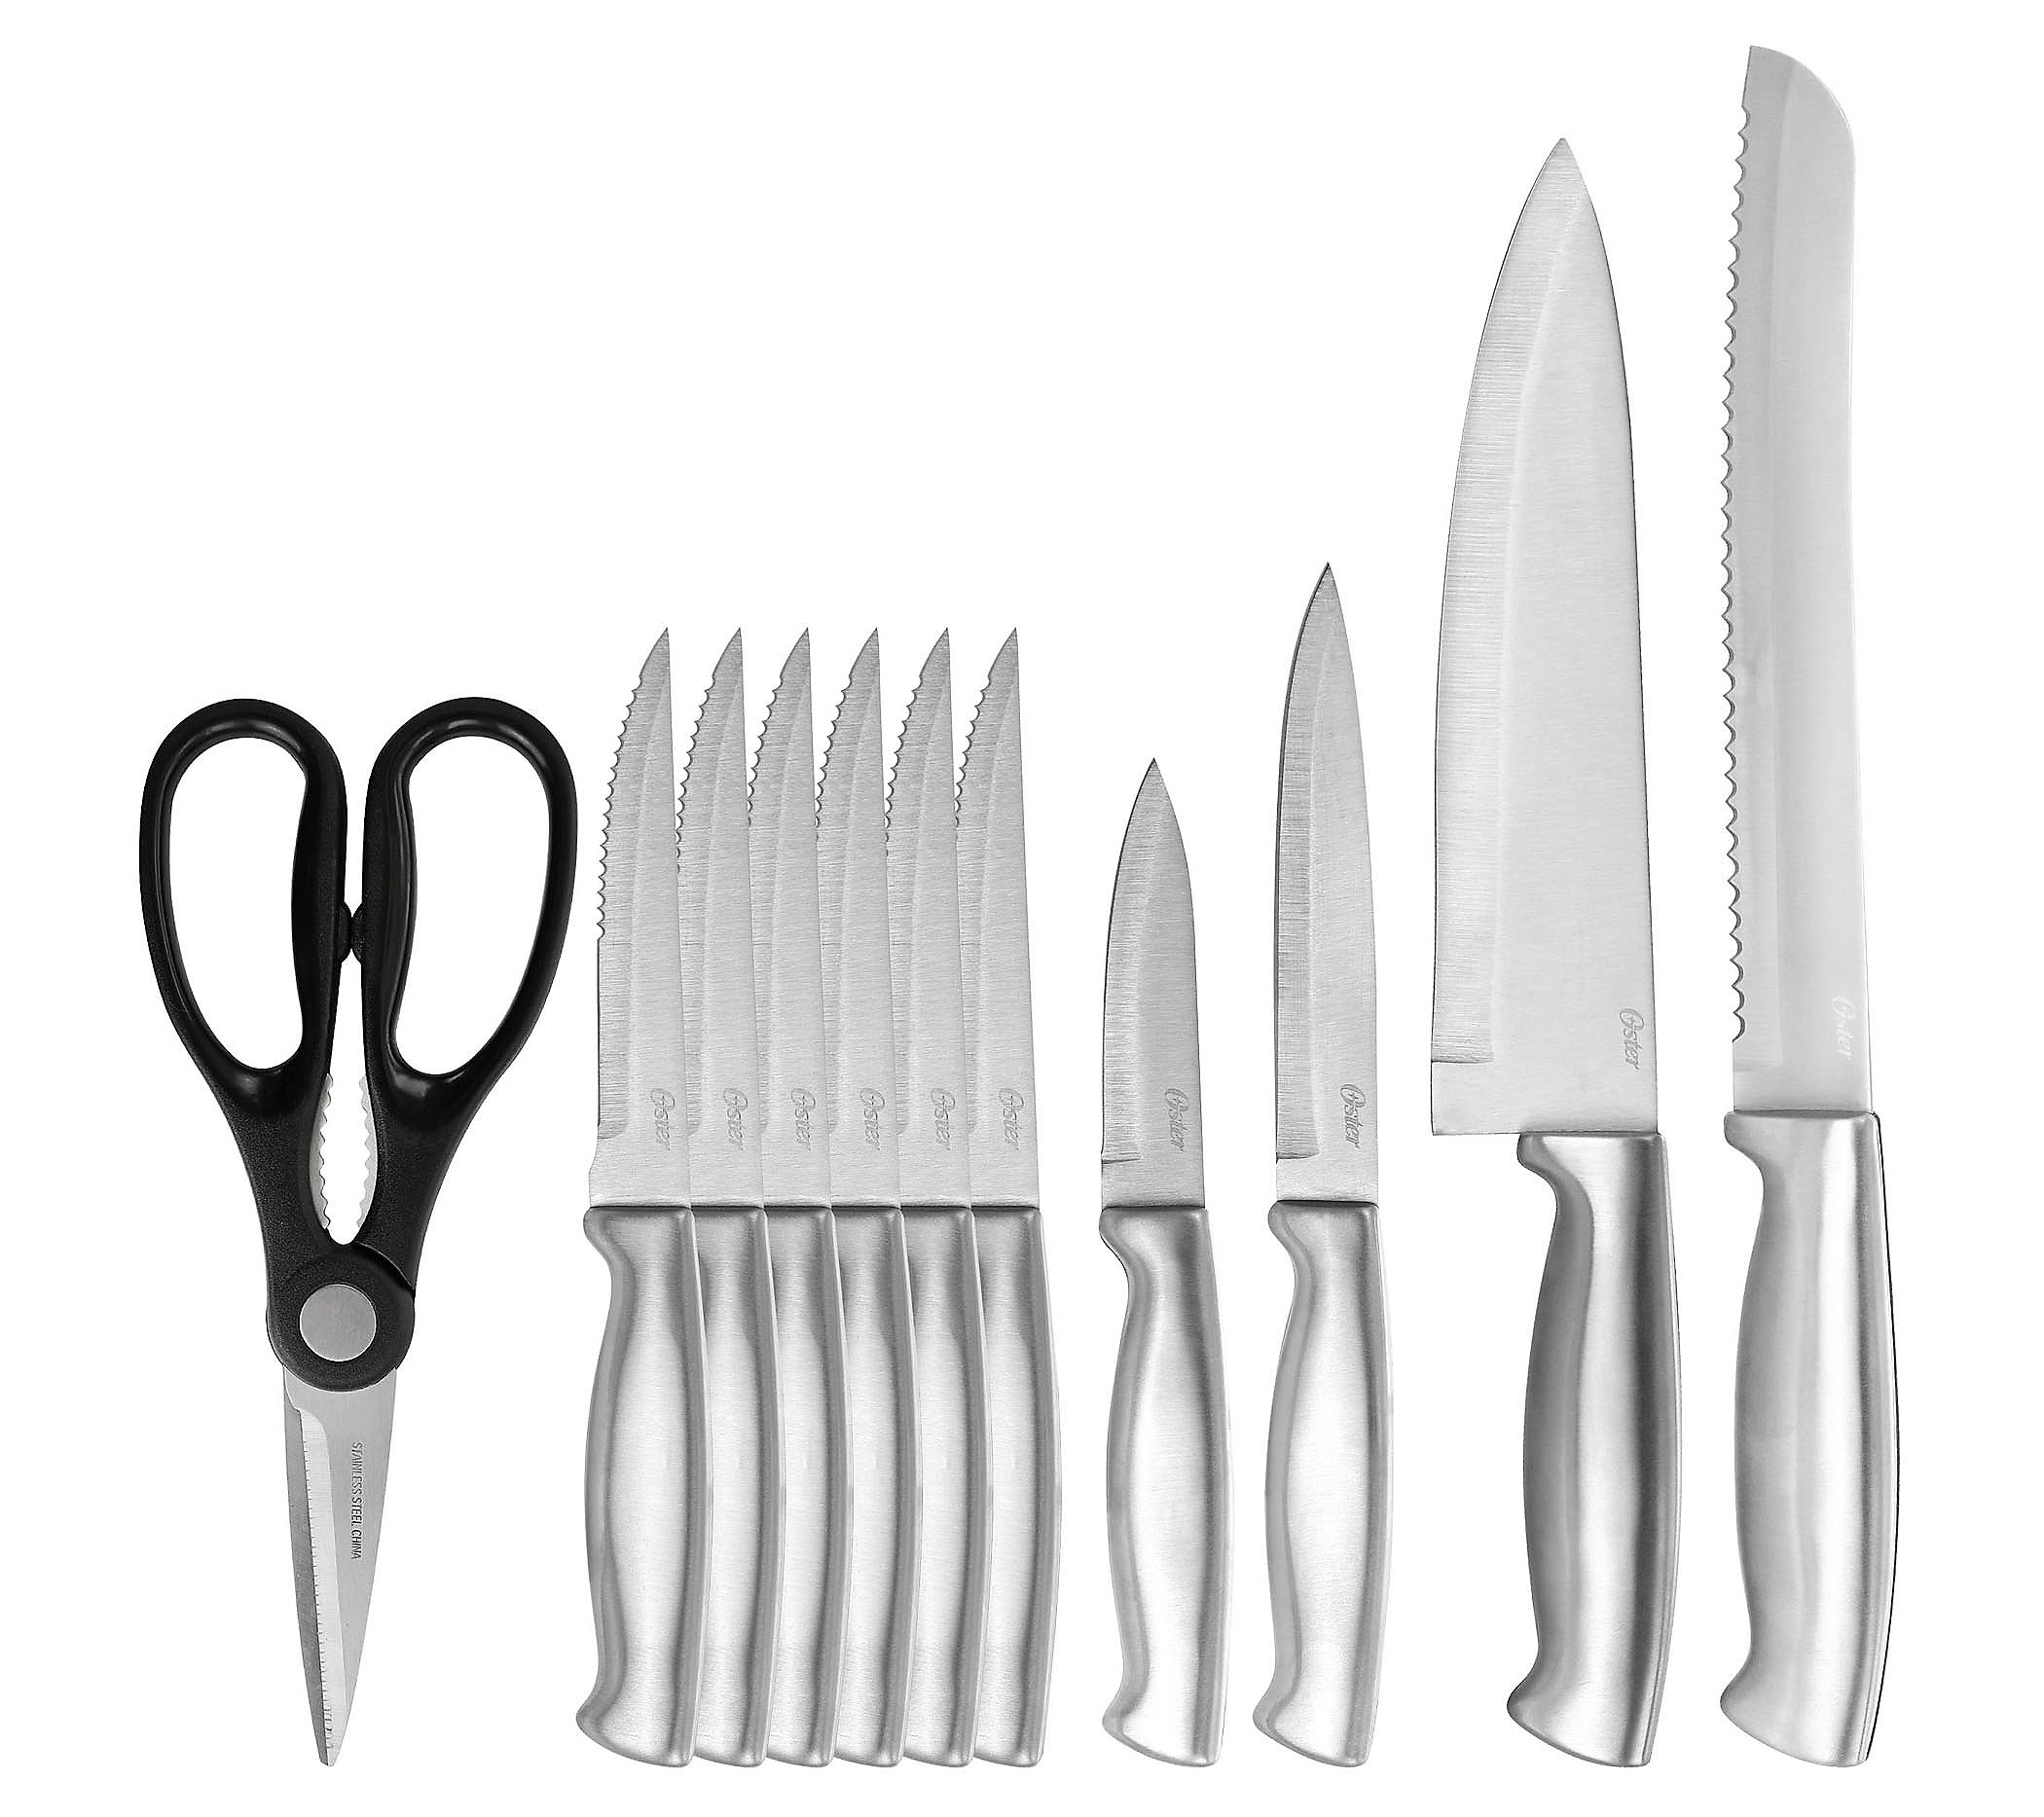 Oster 19 Piece Nylon and Stainless Steel Kitchen Tool and Ute